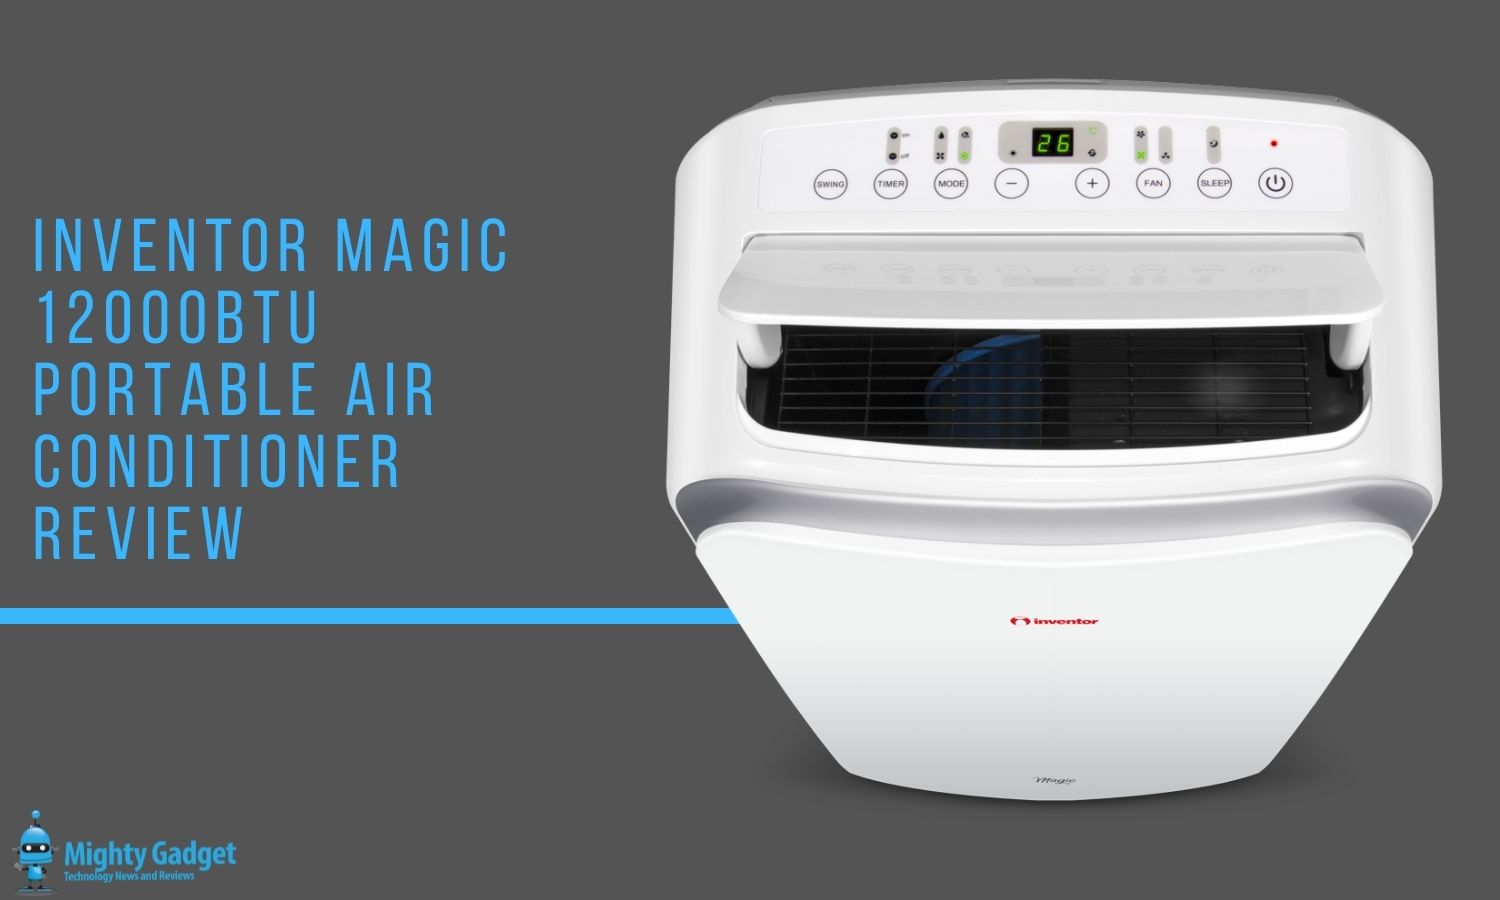 Inventor Magic 12000BTU Portable Air Conditioner Review – An effective air conditioning unit even with the hassle of UK uPVC windows